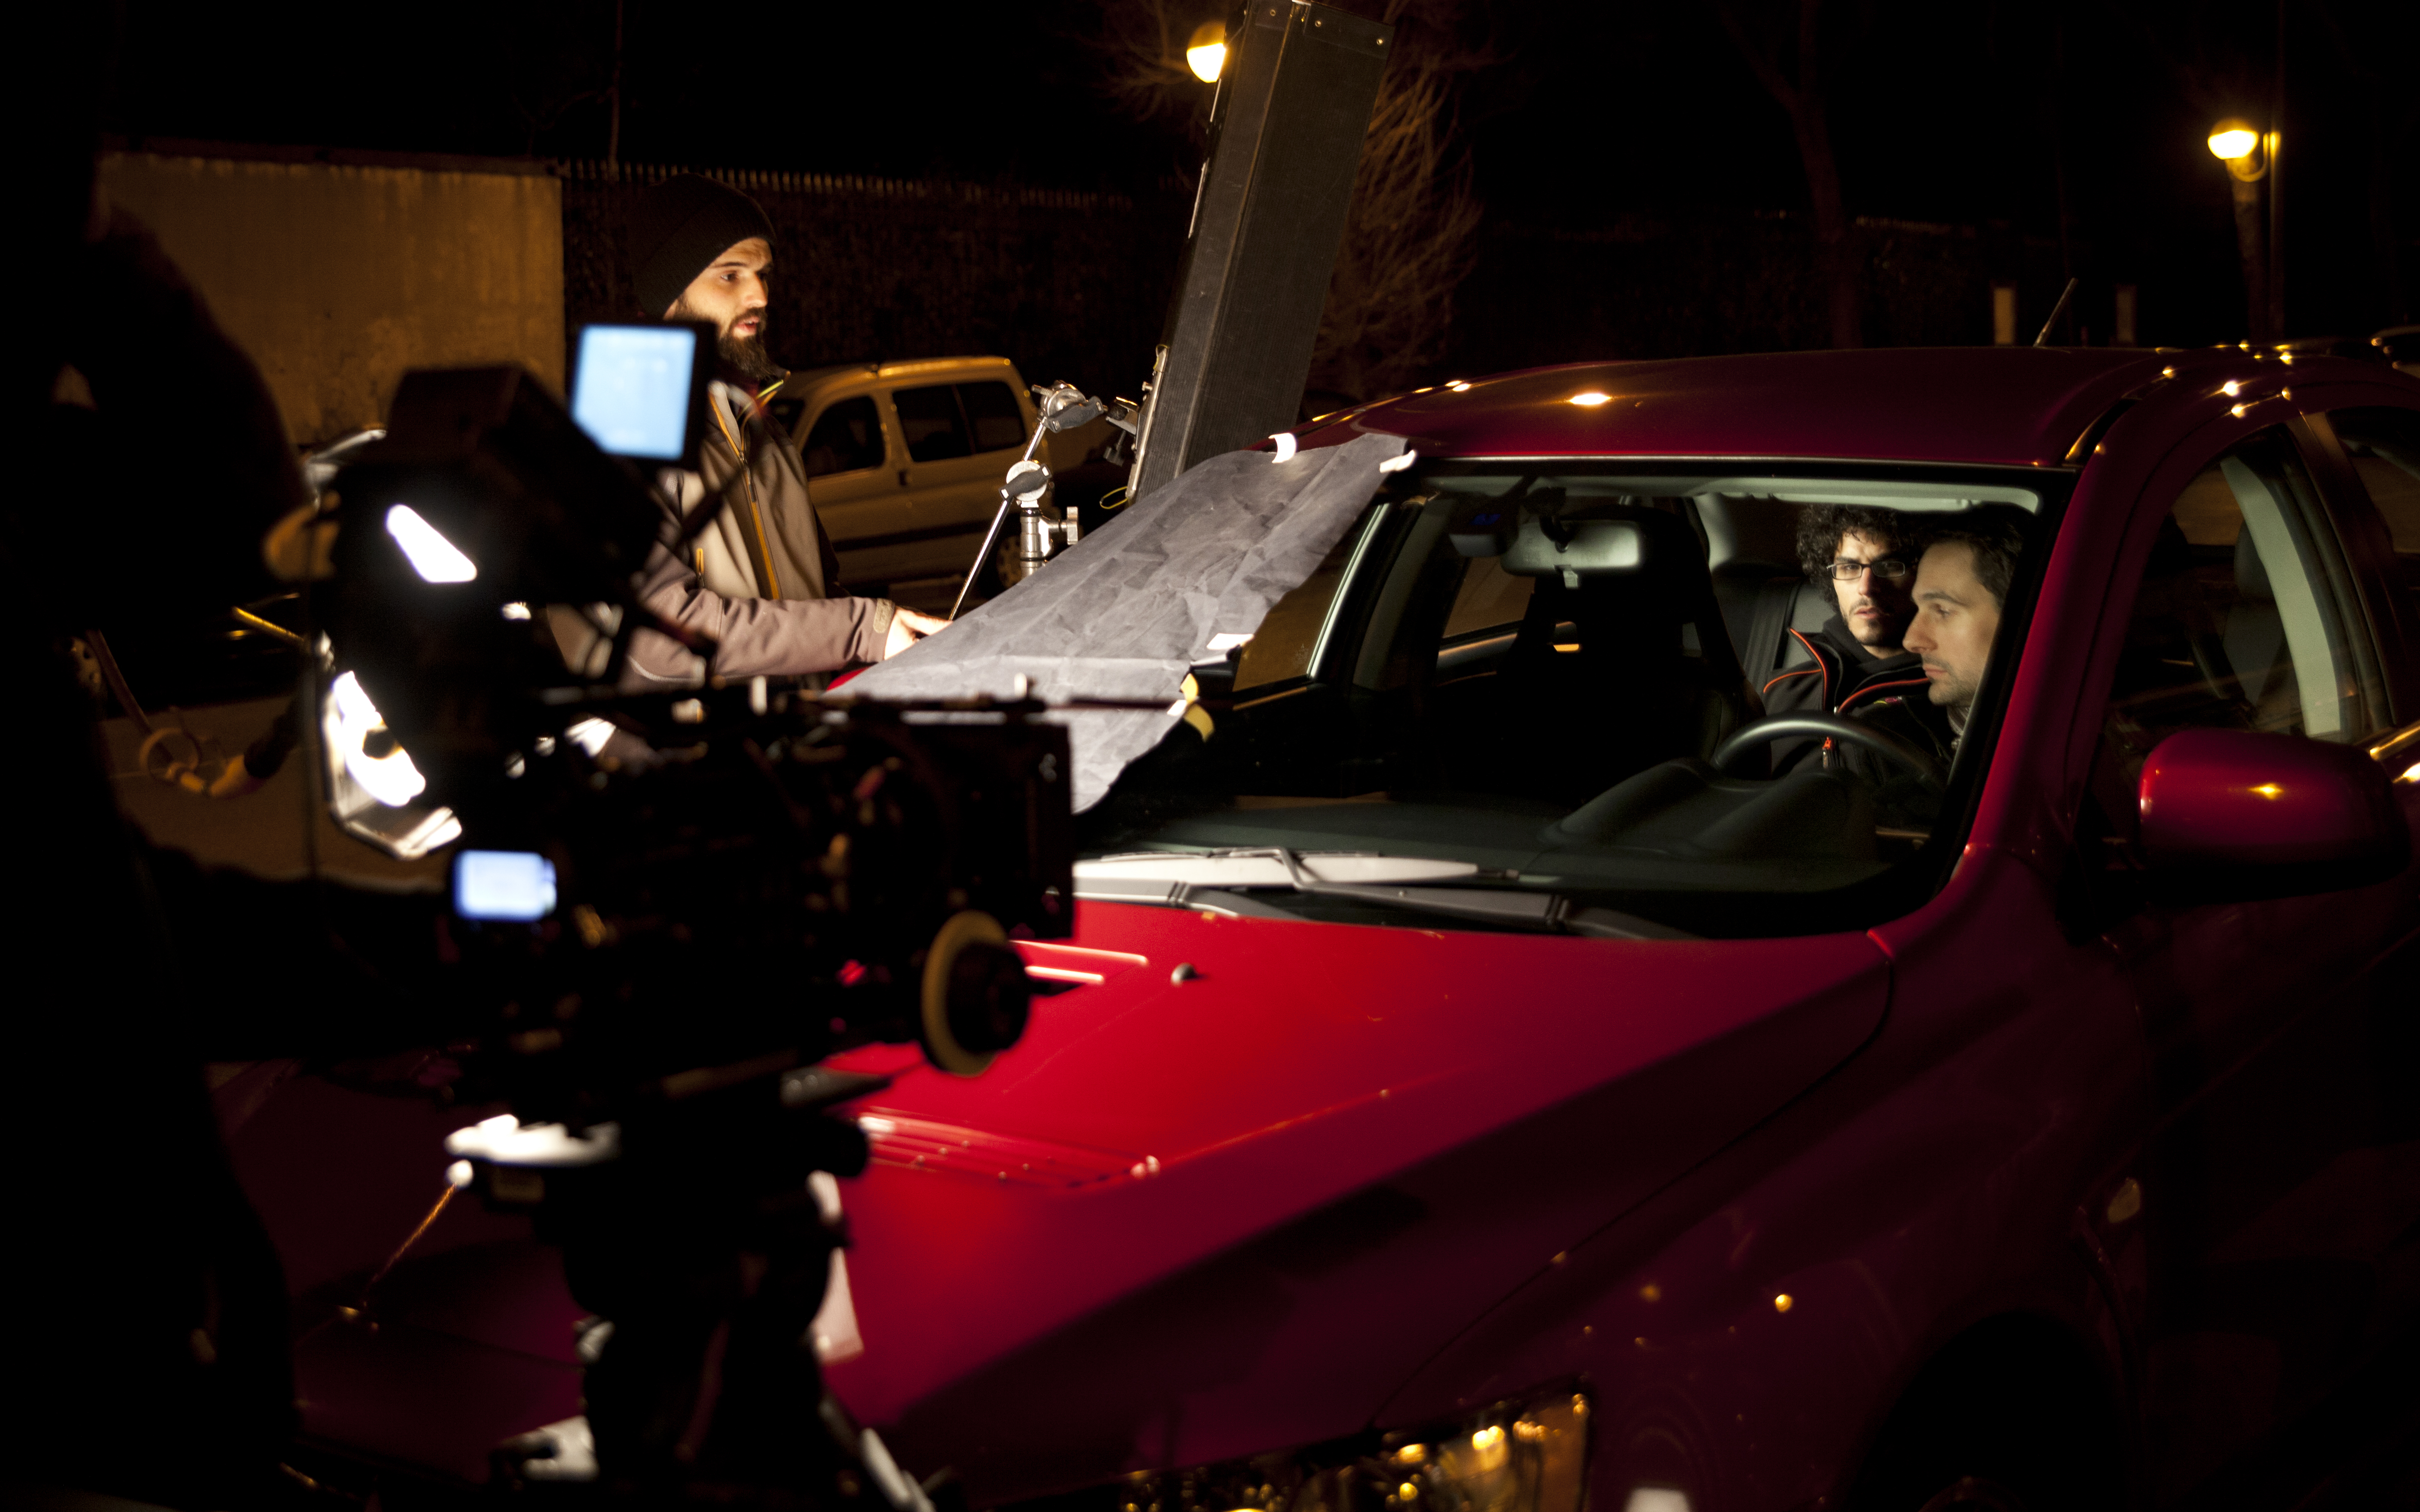 Shooting 'The Last of the Nights'